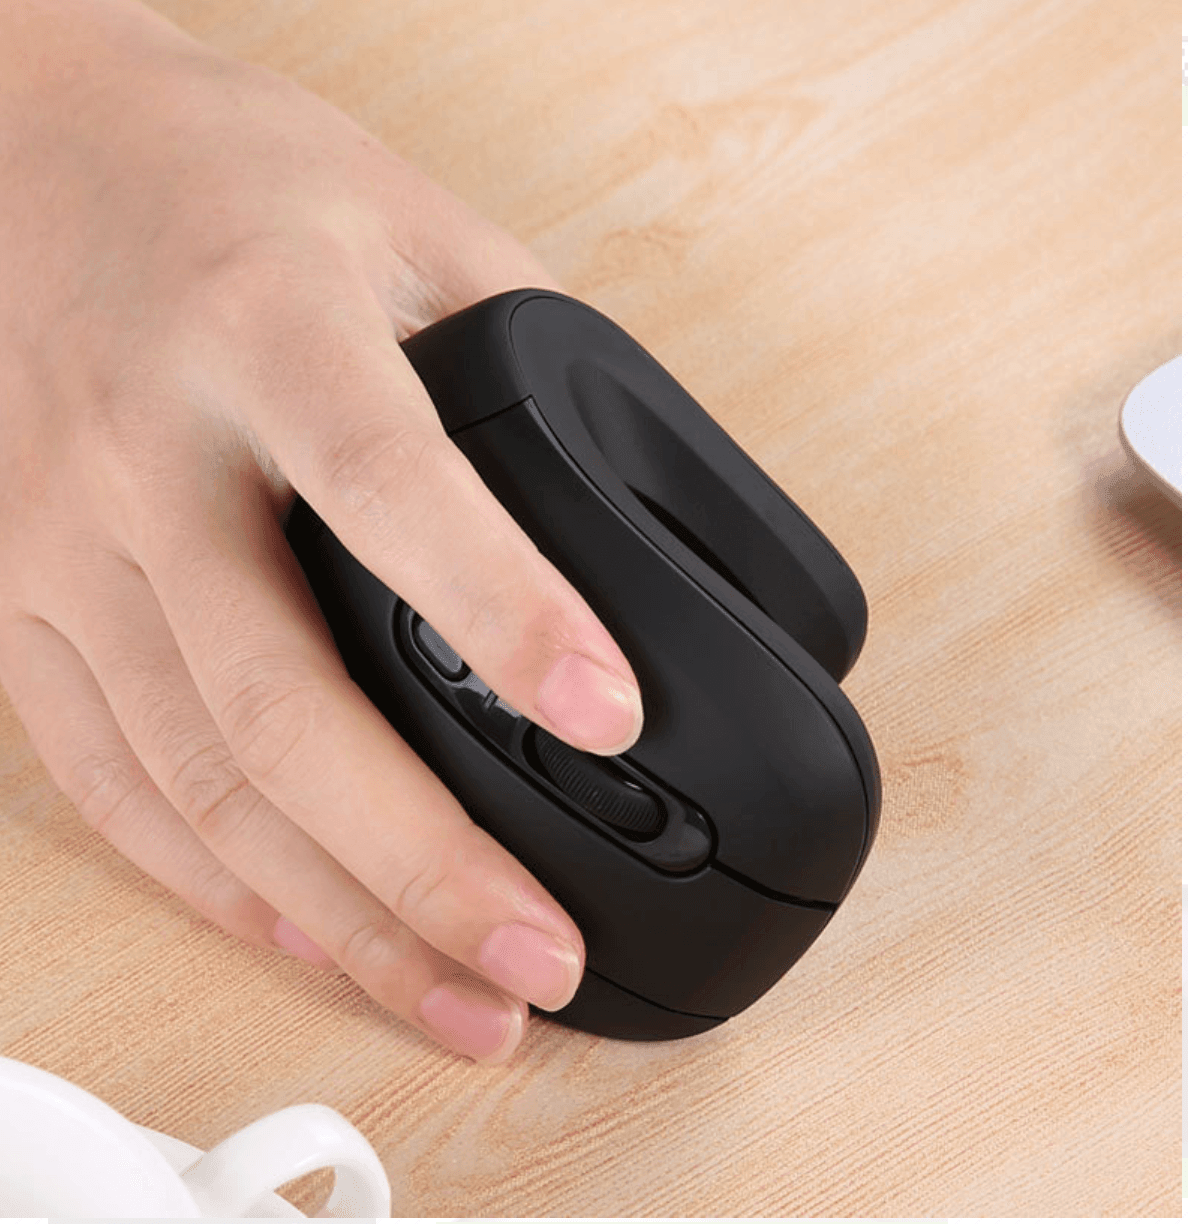 Wireless Vertical Mouse 6 Buttons with Adjustable DPI - Silvis21 ™